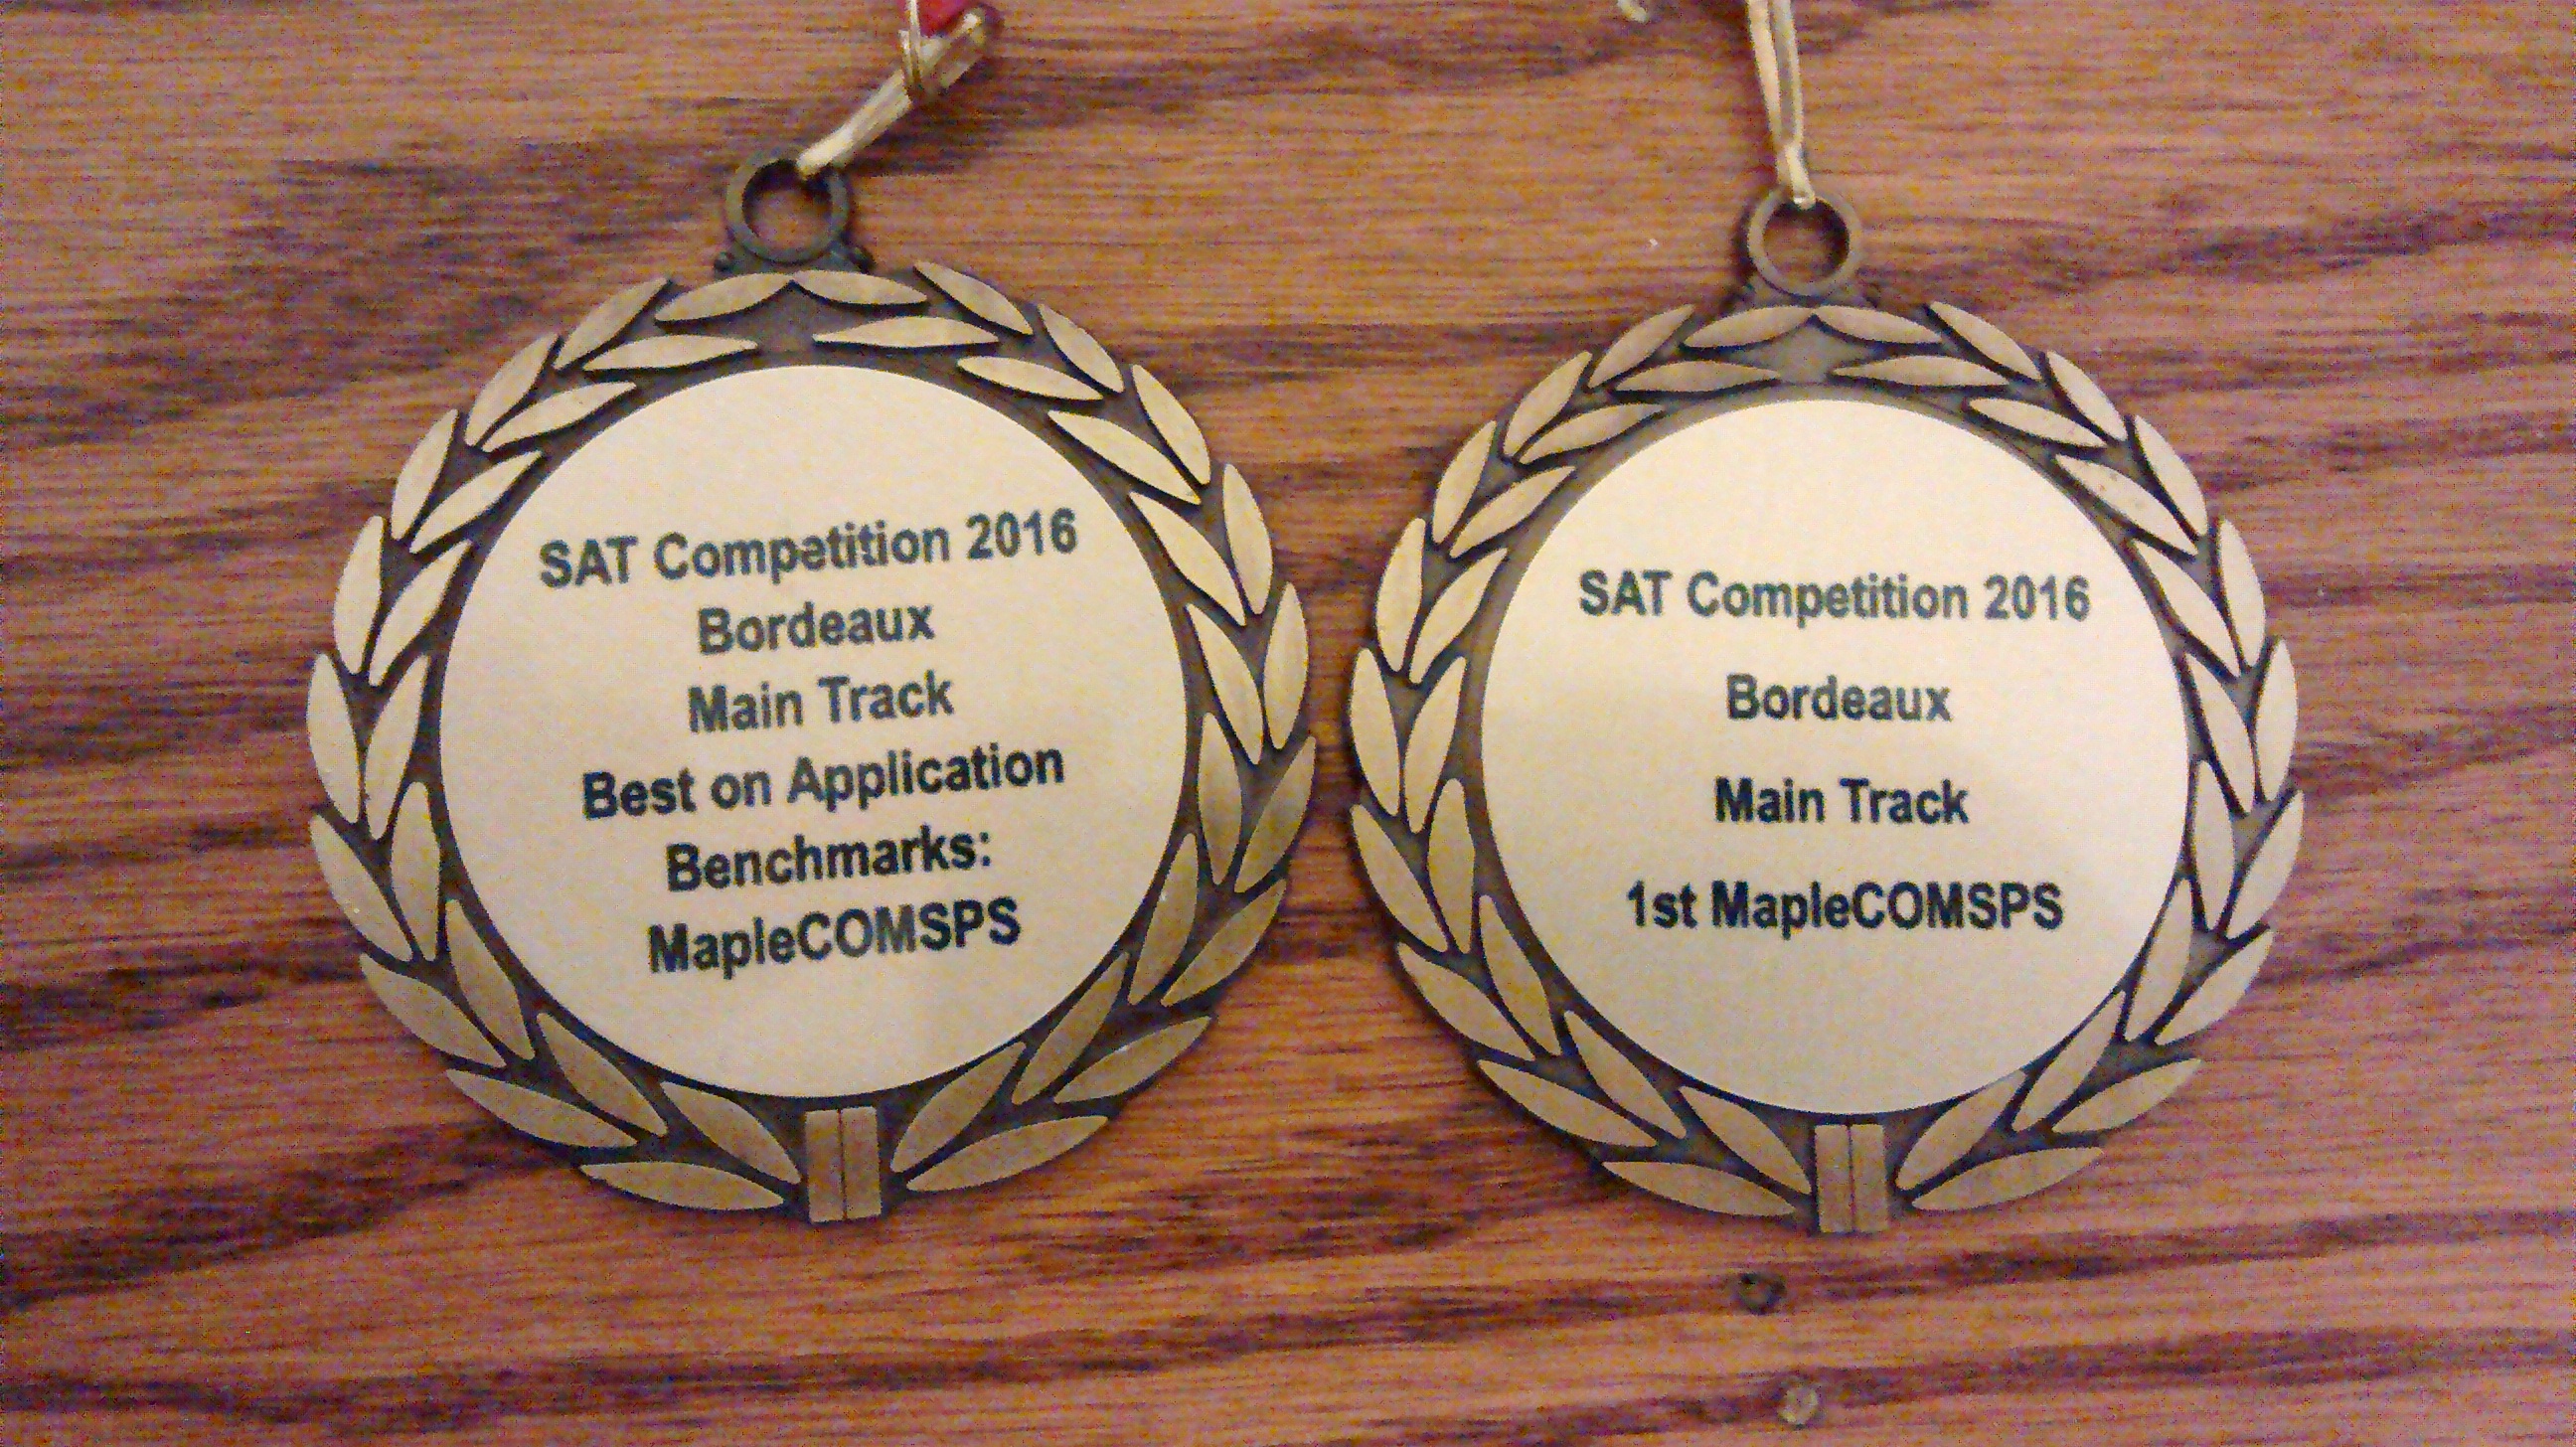 SAT Competition 2016 medals